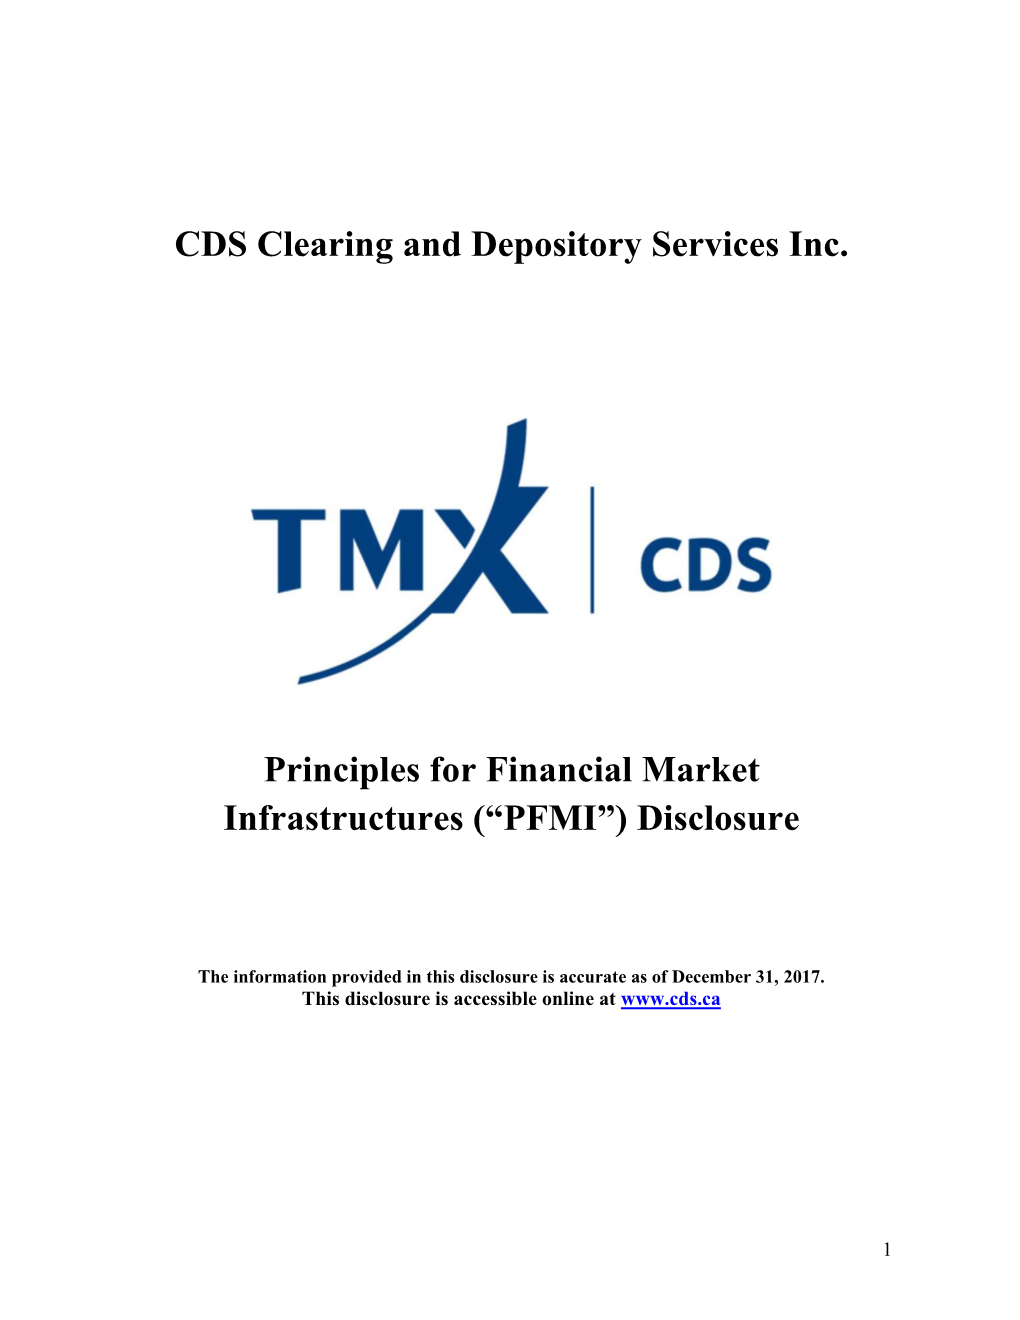 CDS Clearing and Depository Services Inc. Principles For